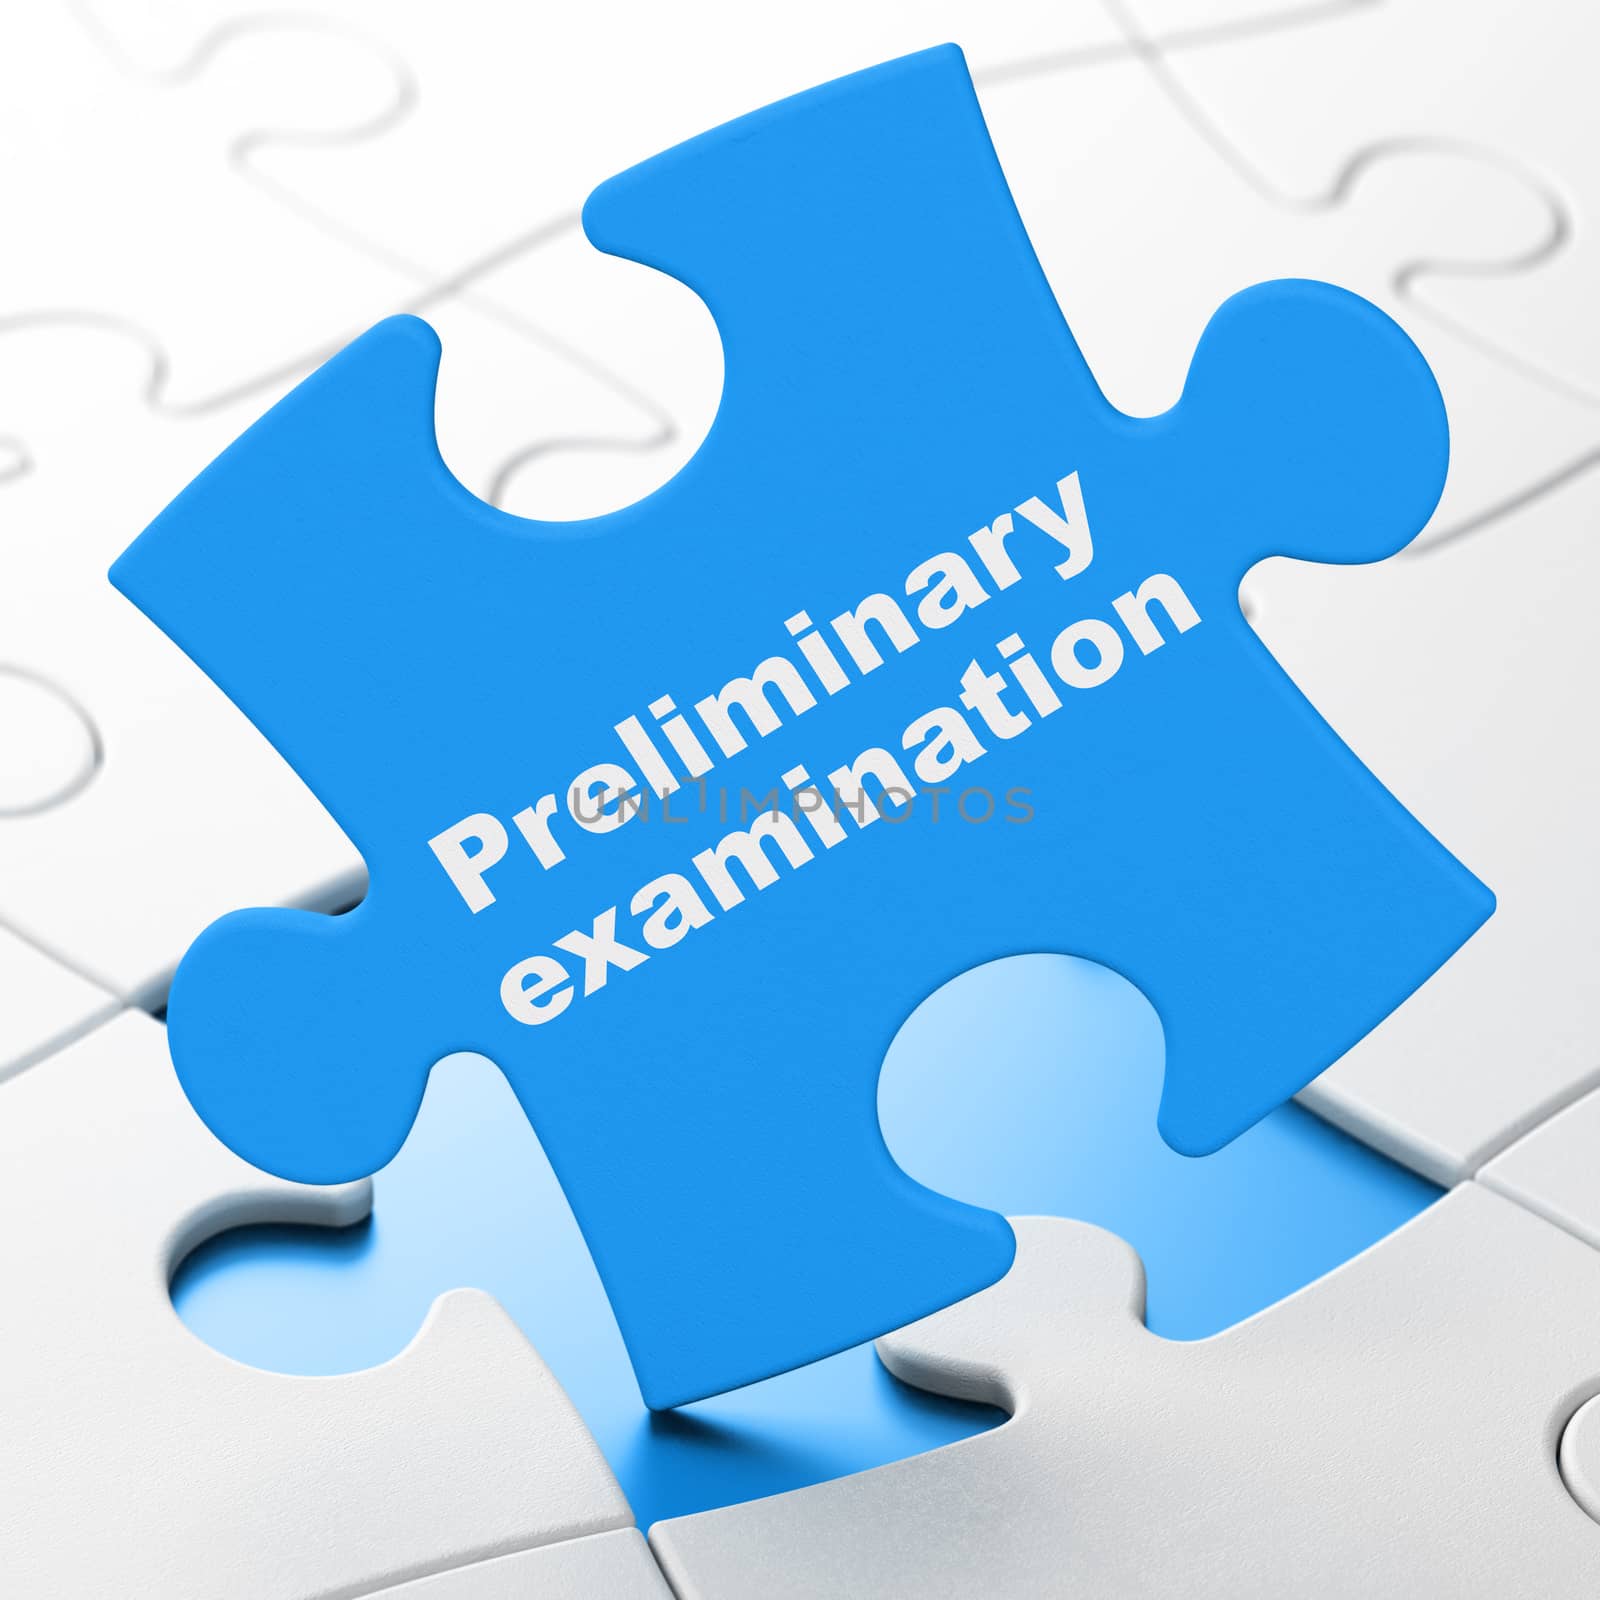 Education concept: Preliminary Examination on Blue puzzle pieces background, 3D rendering